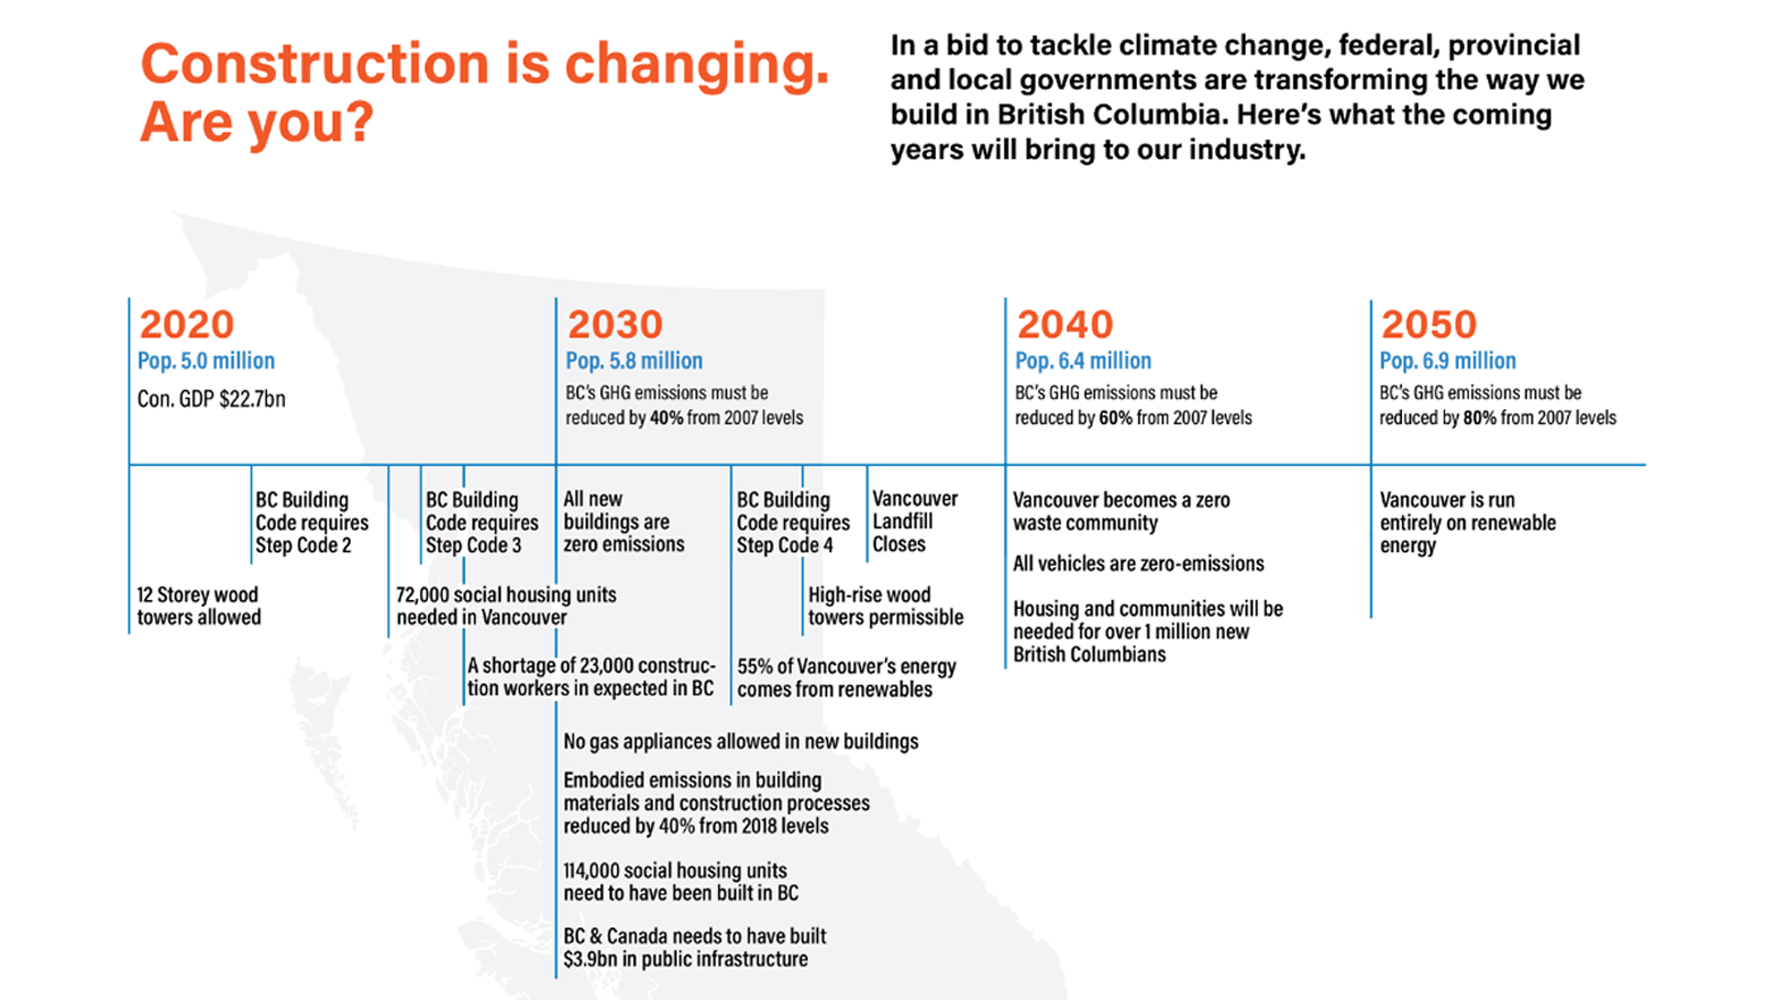 To tackle climate change, federal, provincial and local governments are transforming the way we build in BC – this roadmap details some of the major goals. Are you ready?